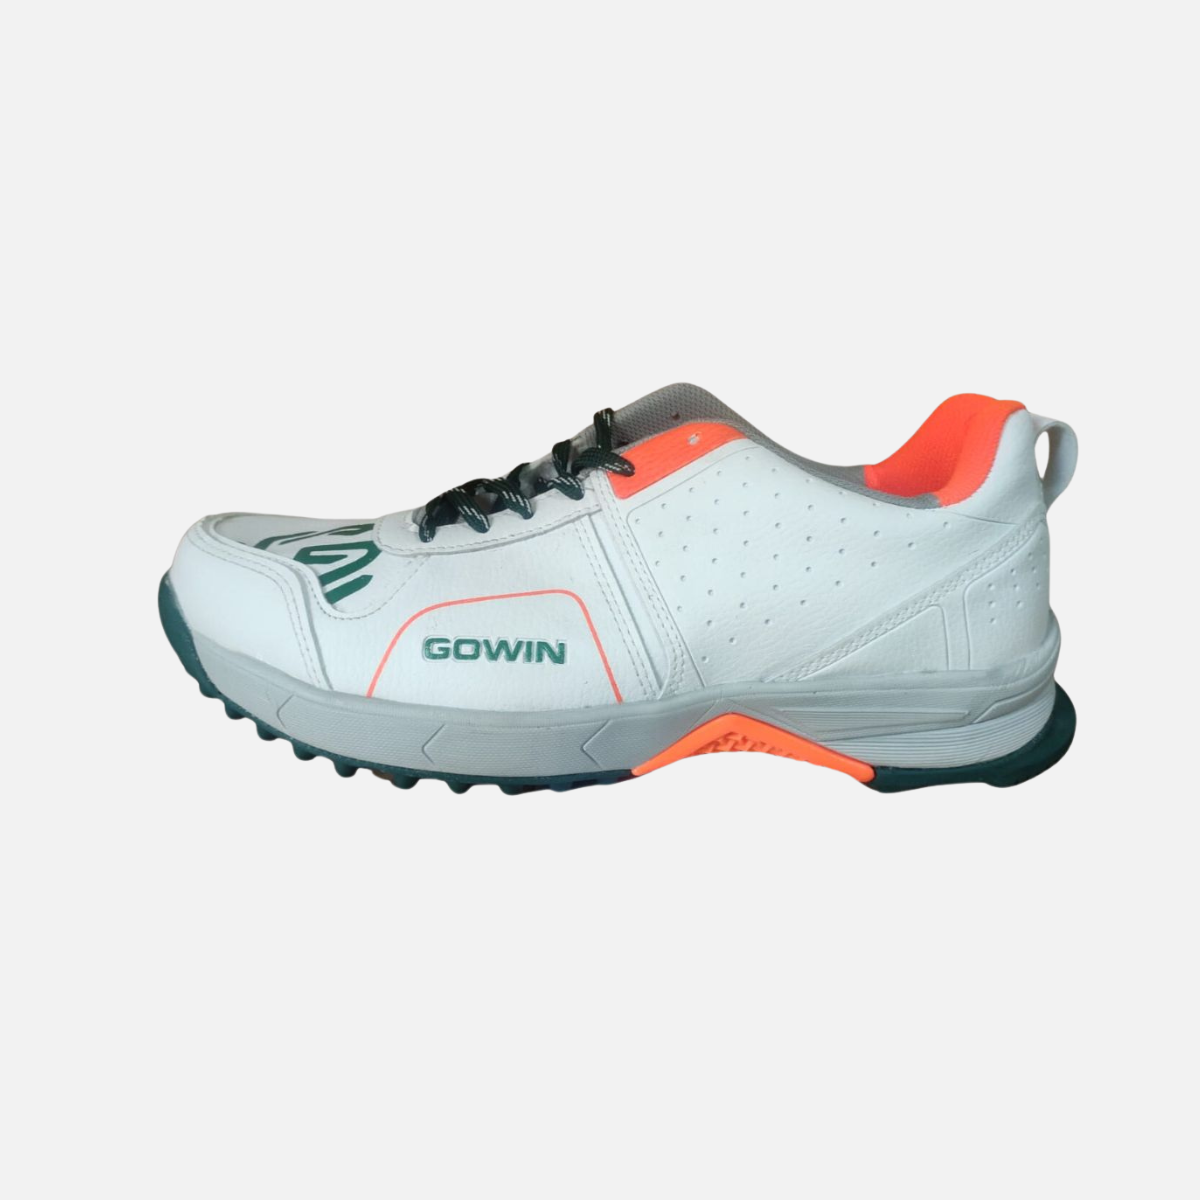 Gowin Pace-3 Cricket Shoes -White/Sea Green